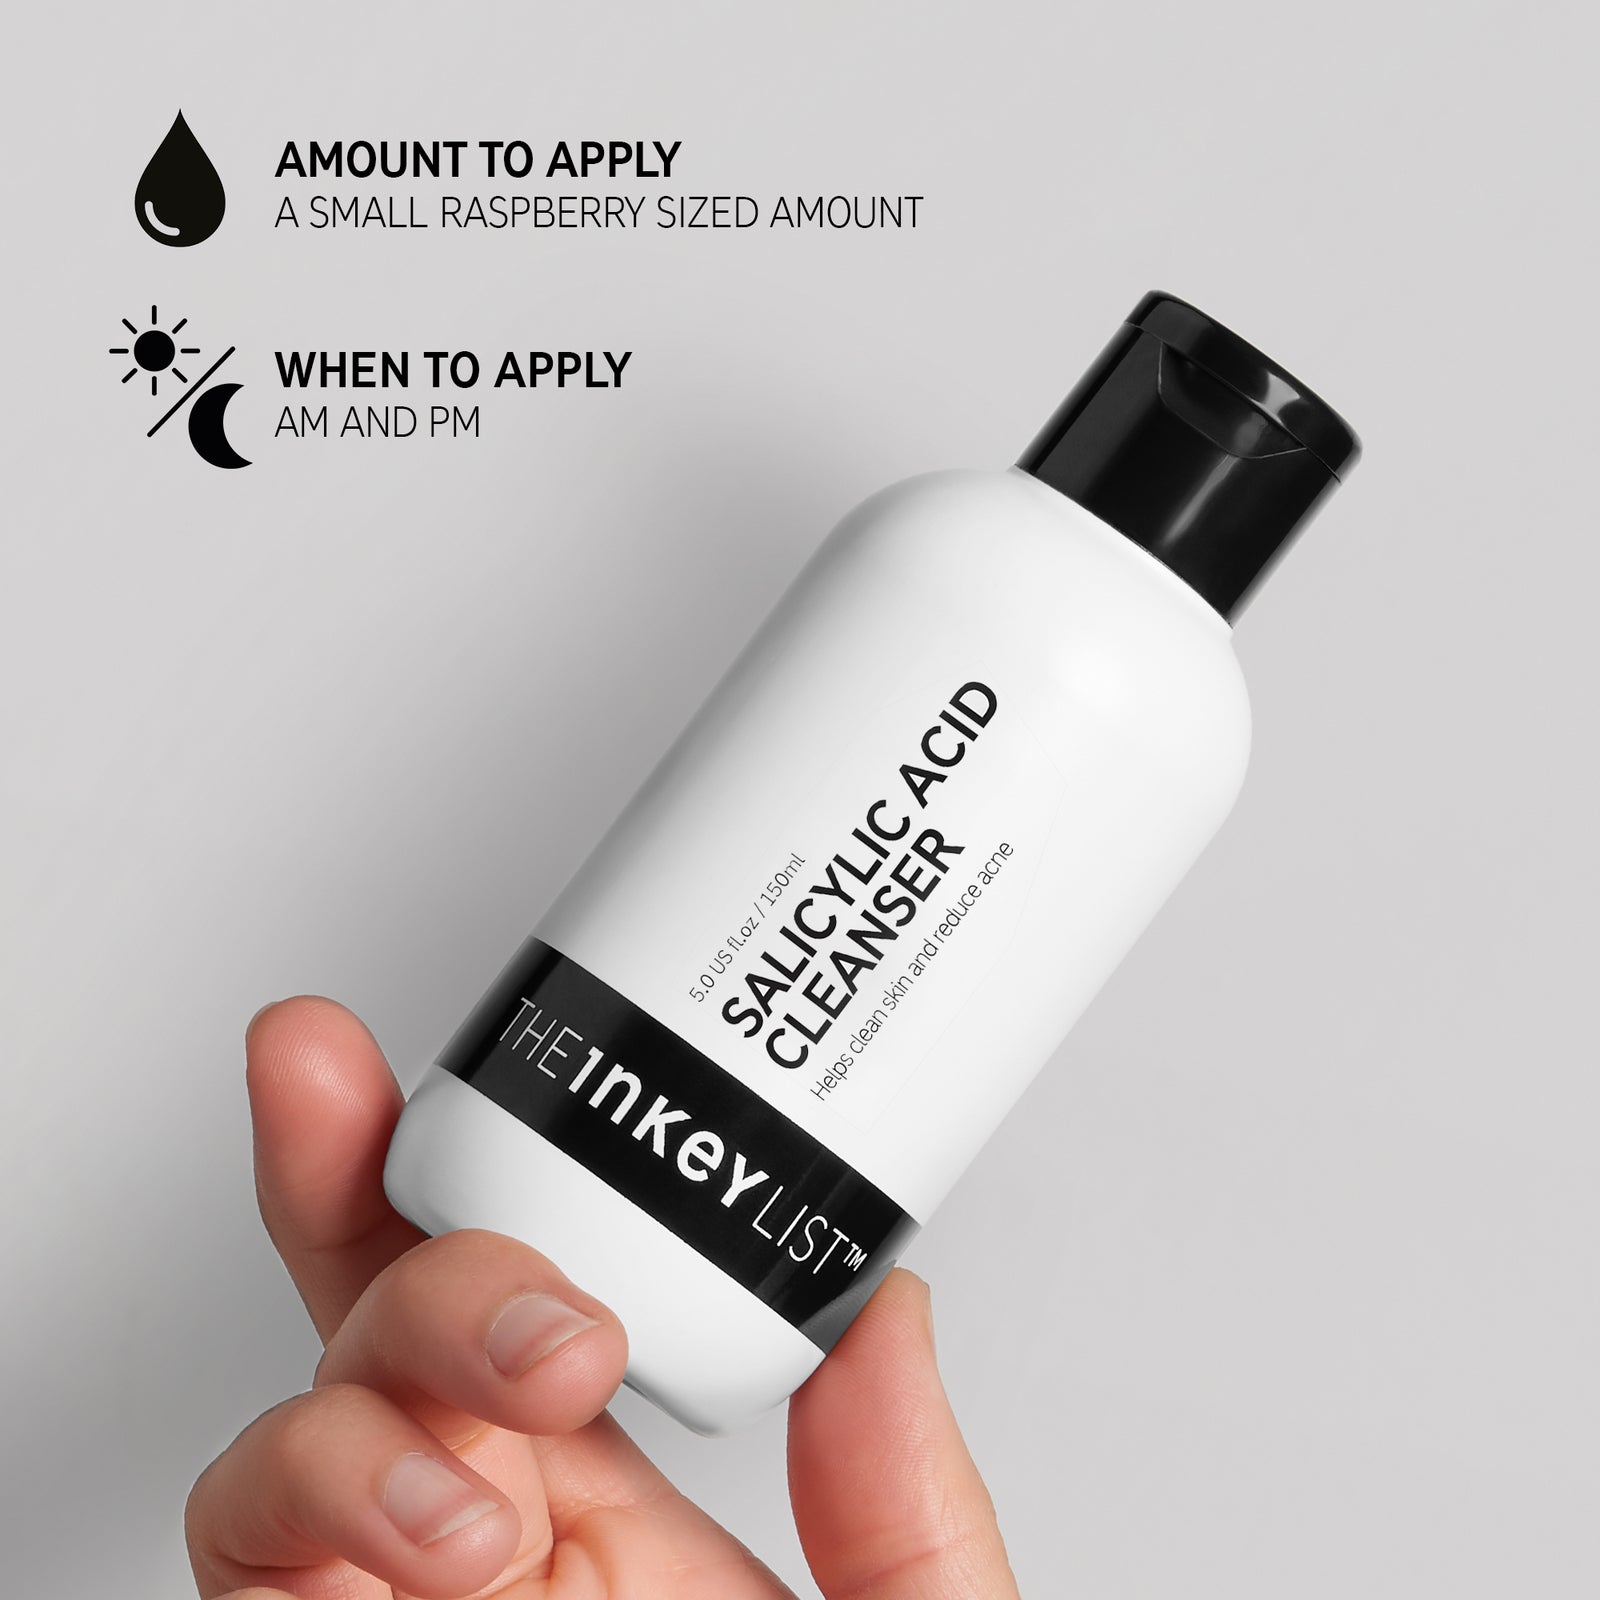 Salicylic Acid Cleanser bottle with text that reads 'Amount to apply (small raspberry sized amount)' and 'When to apply (AM and PM)'